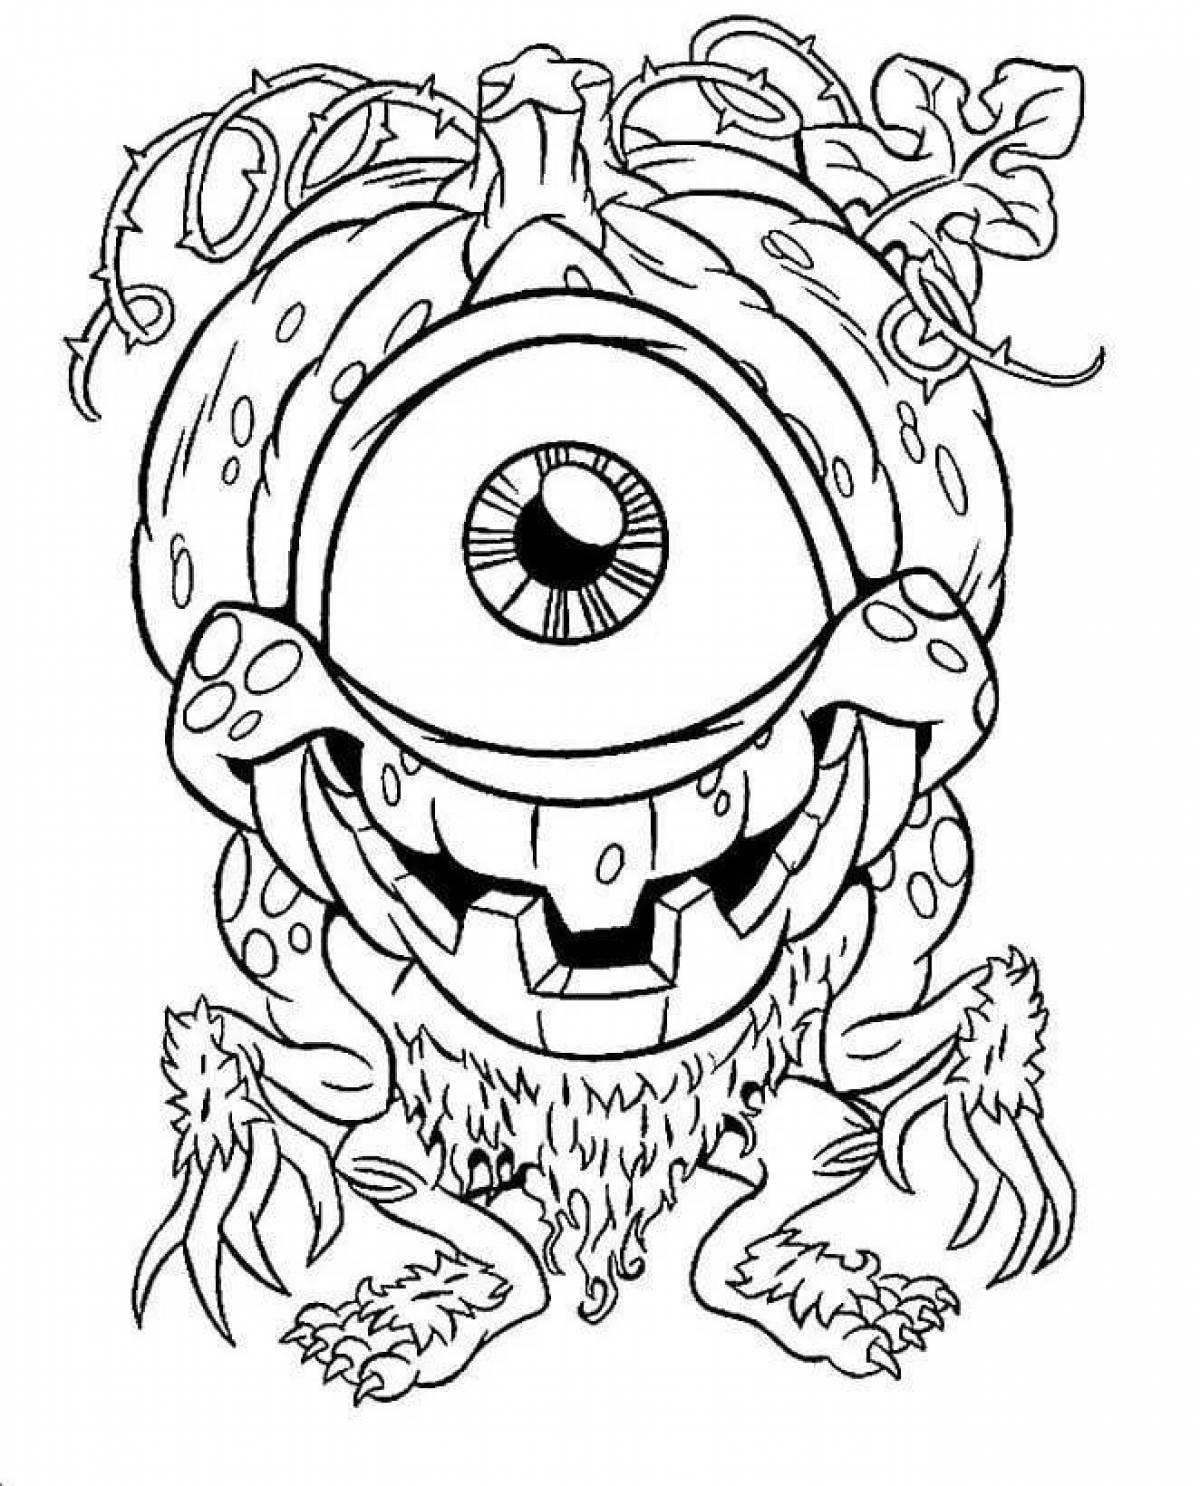 Coloring page scary but beautiful: chilling beauty